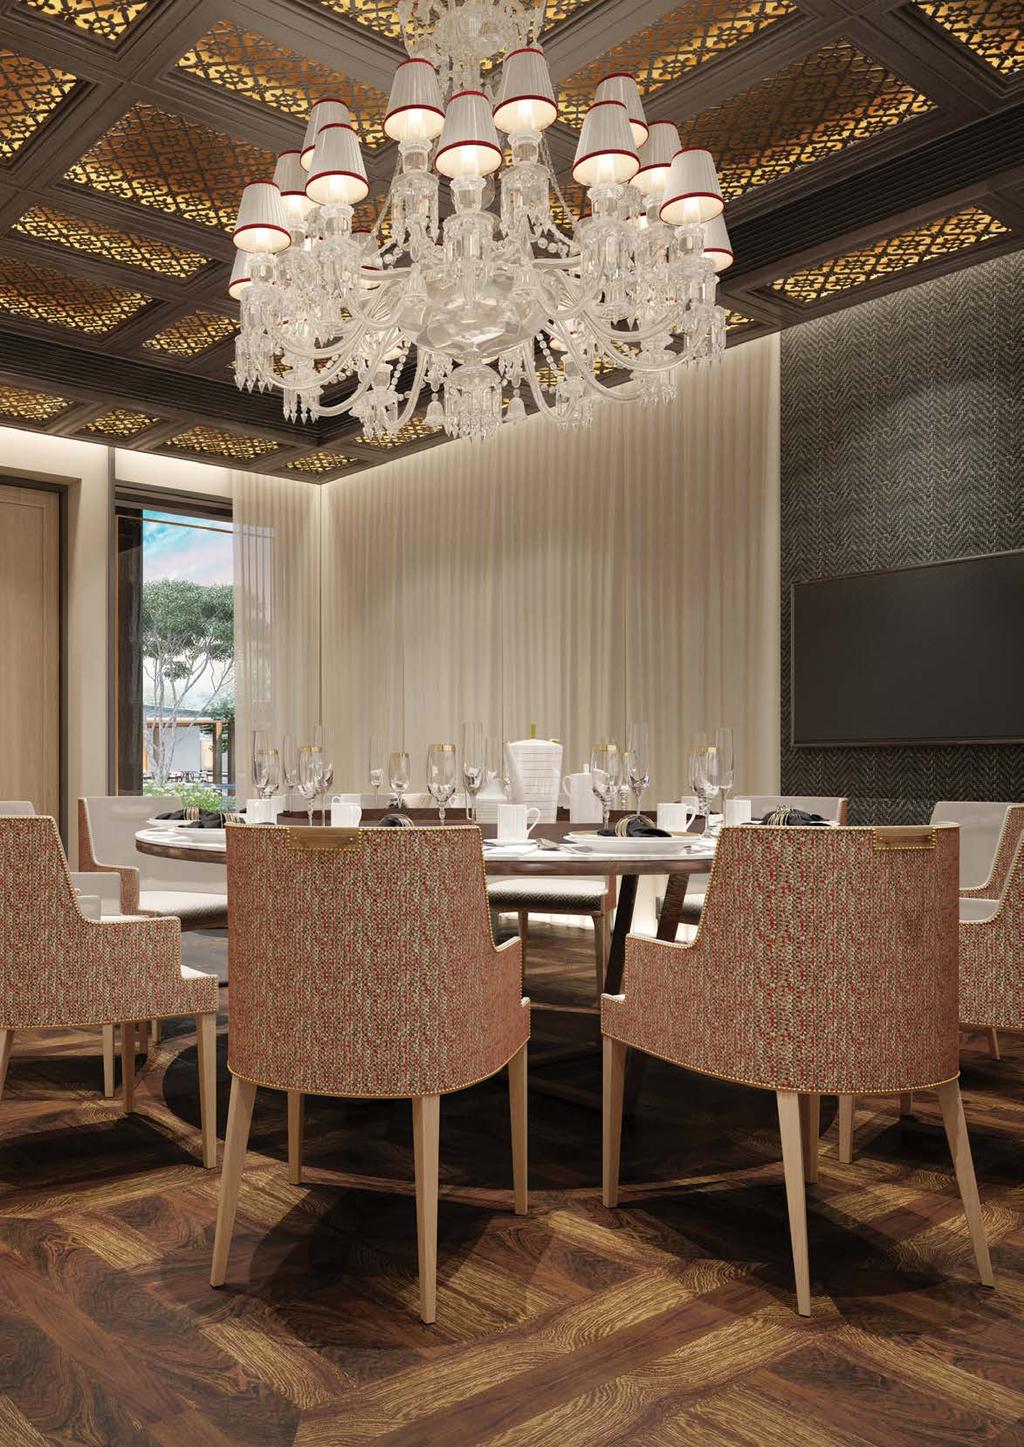 Chinese Restaurant Dining Experiences IN THE SAME WAY THAT THE RESORT S DESIGN HAS BEEN INFORMED AND COMPLEMENTED BY ITS SPECTACULAR NATURAL SETTING, ITS CUISINE CELEBRATES THE REGION S RICH CULINARY